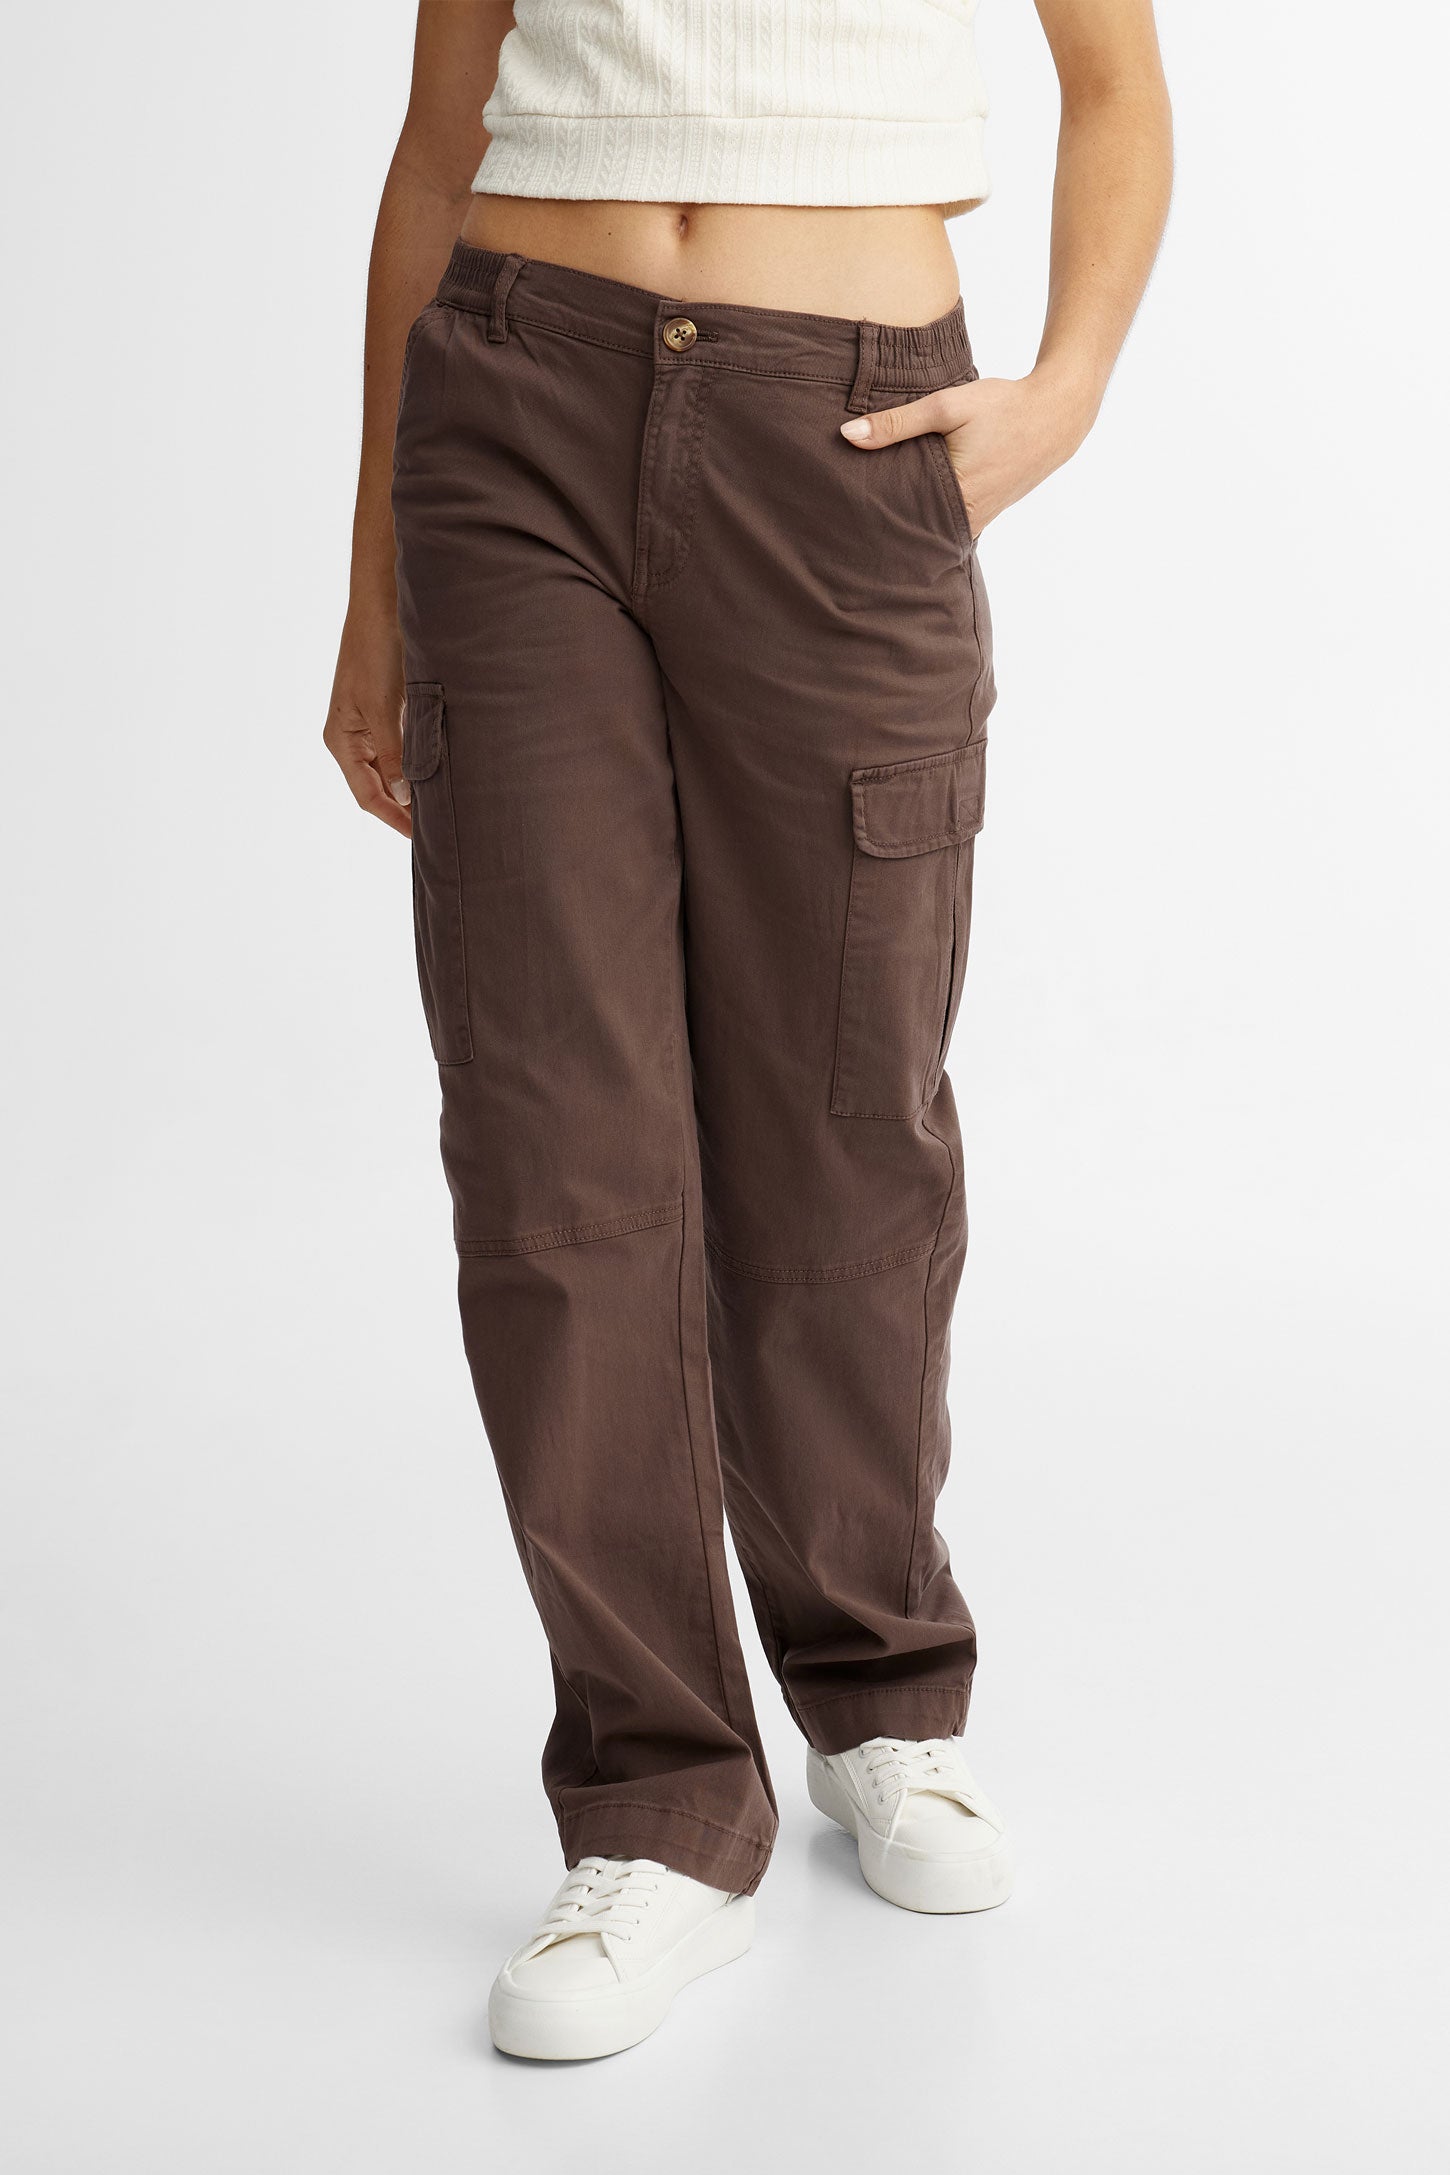 Brown Cotton Embroidered Pants | Fancy Pant-Brown | Cilory.com